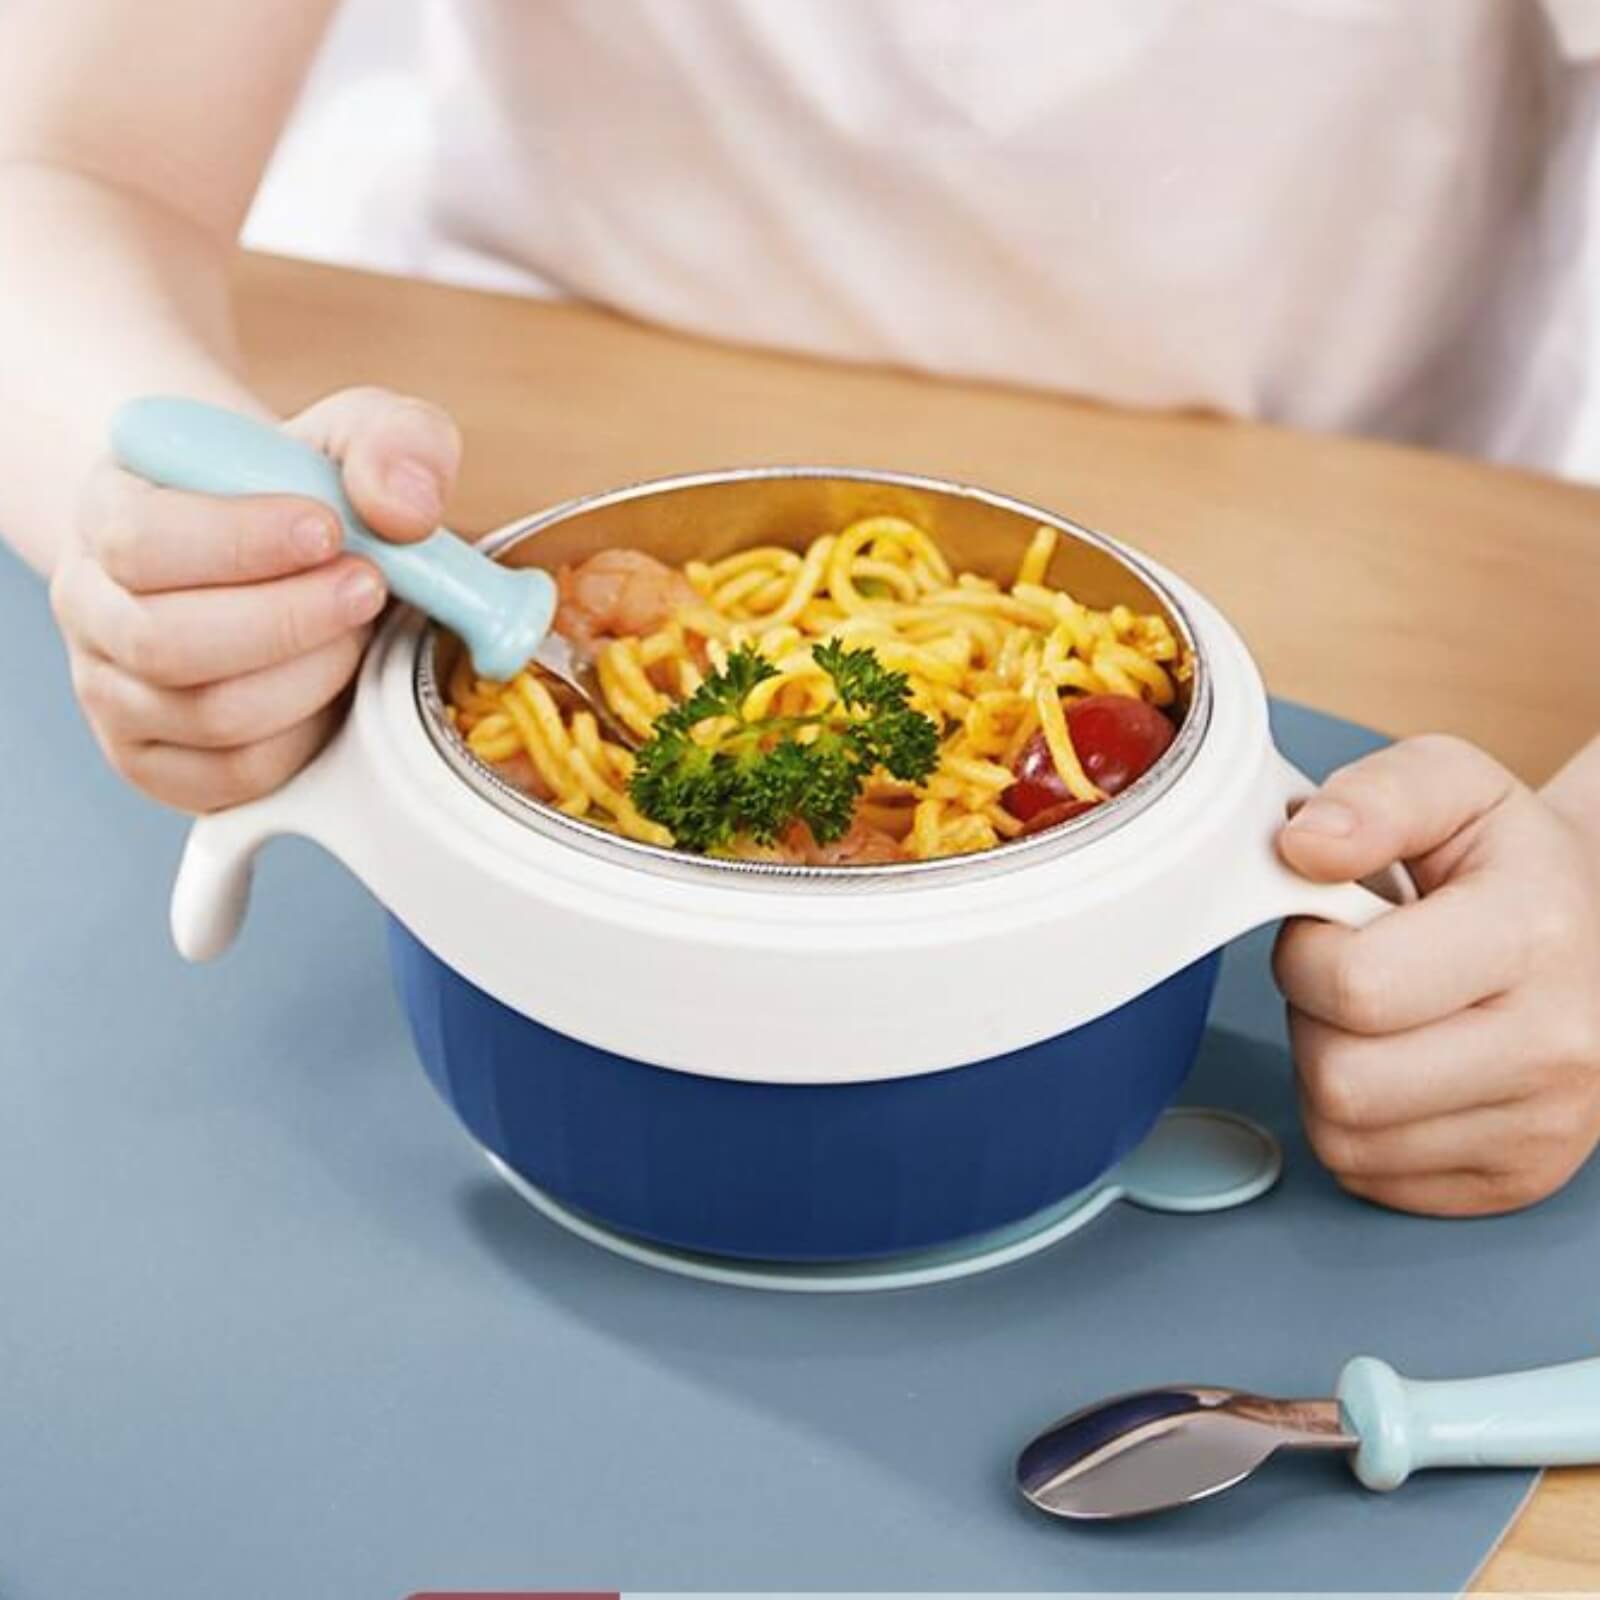 Baby-Toddler-Suction Cup Set Kids Tableware Thermal Stainless Steel Bowl with food blue clolor